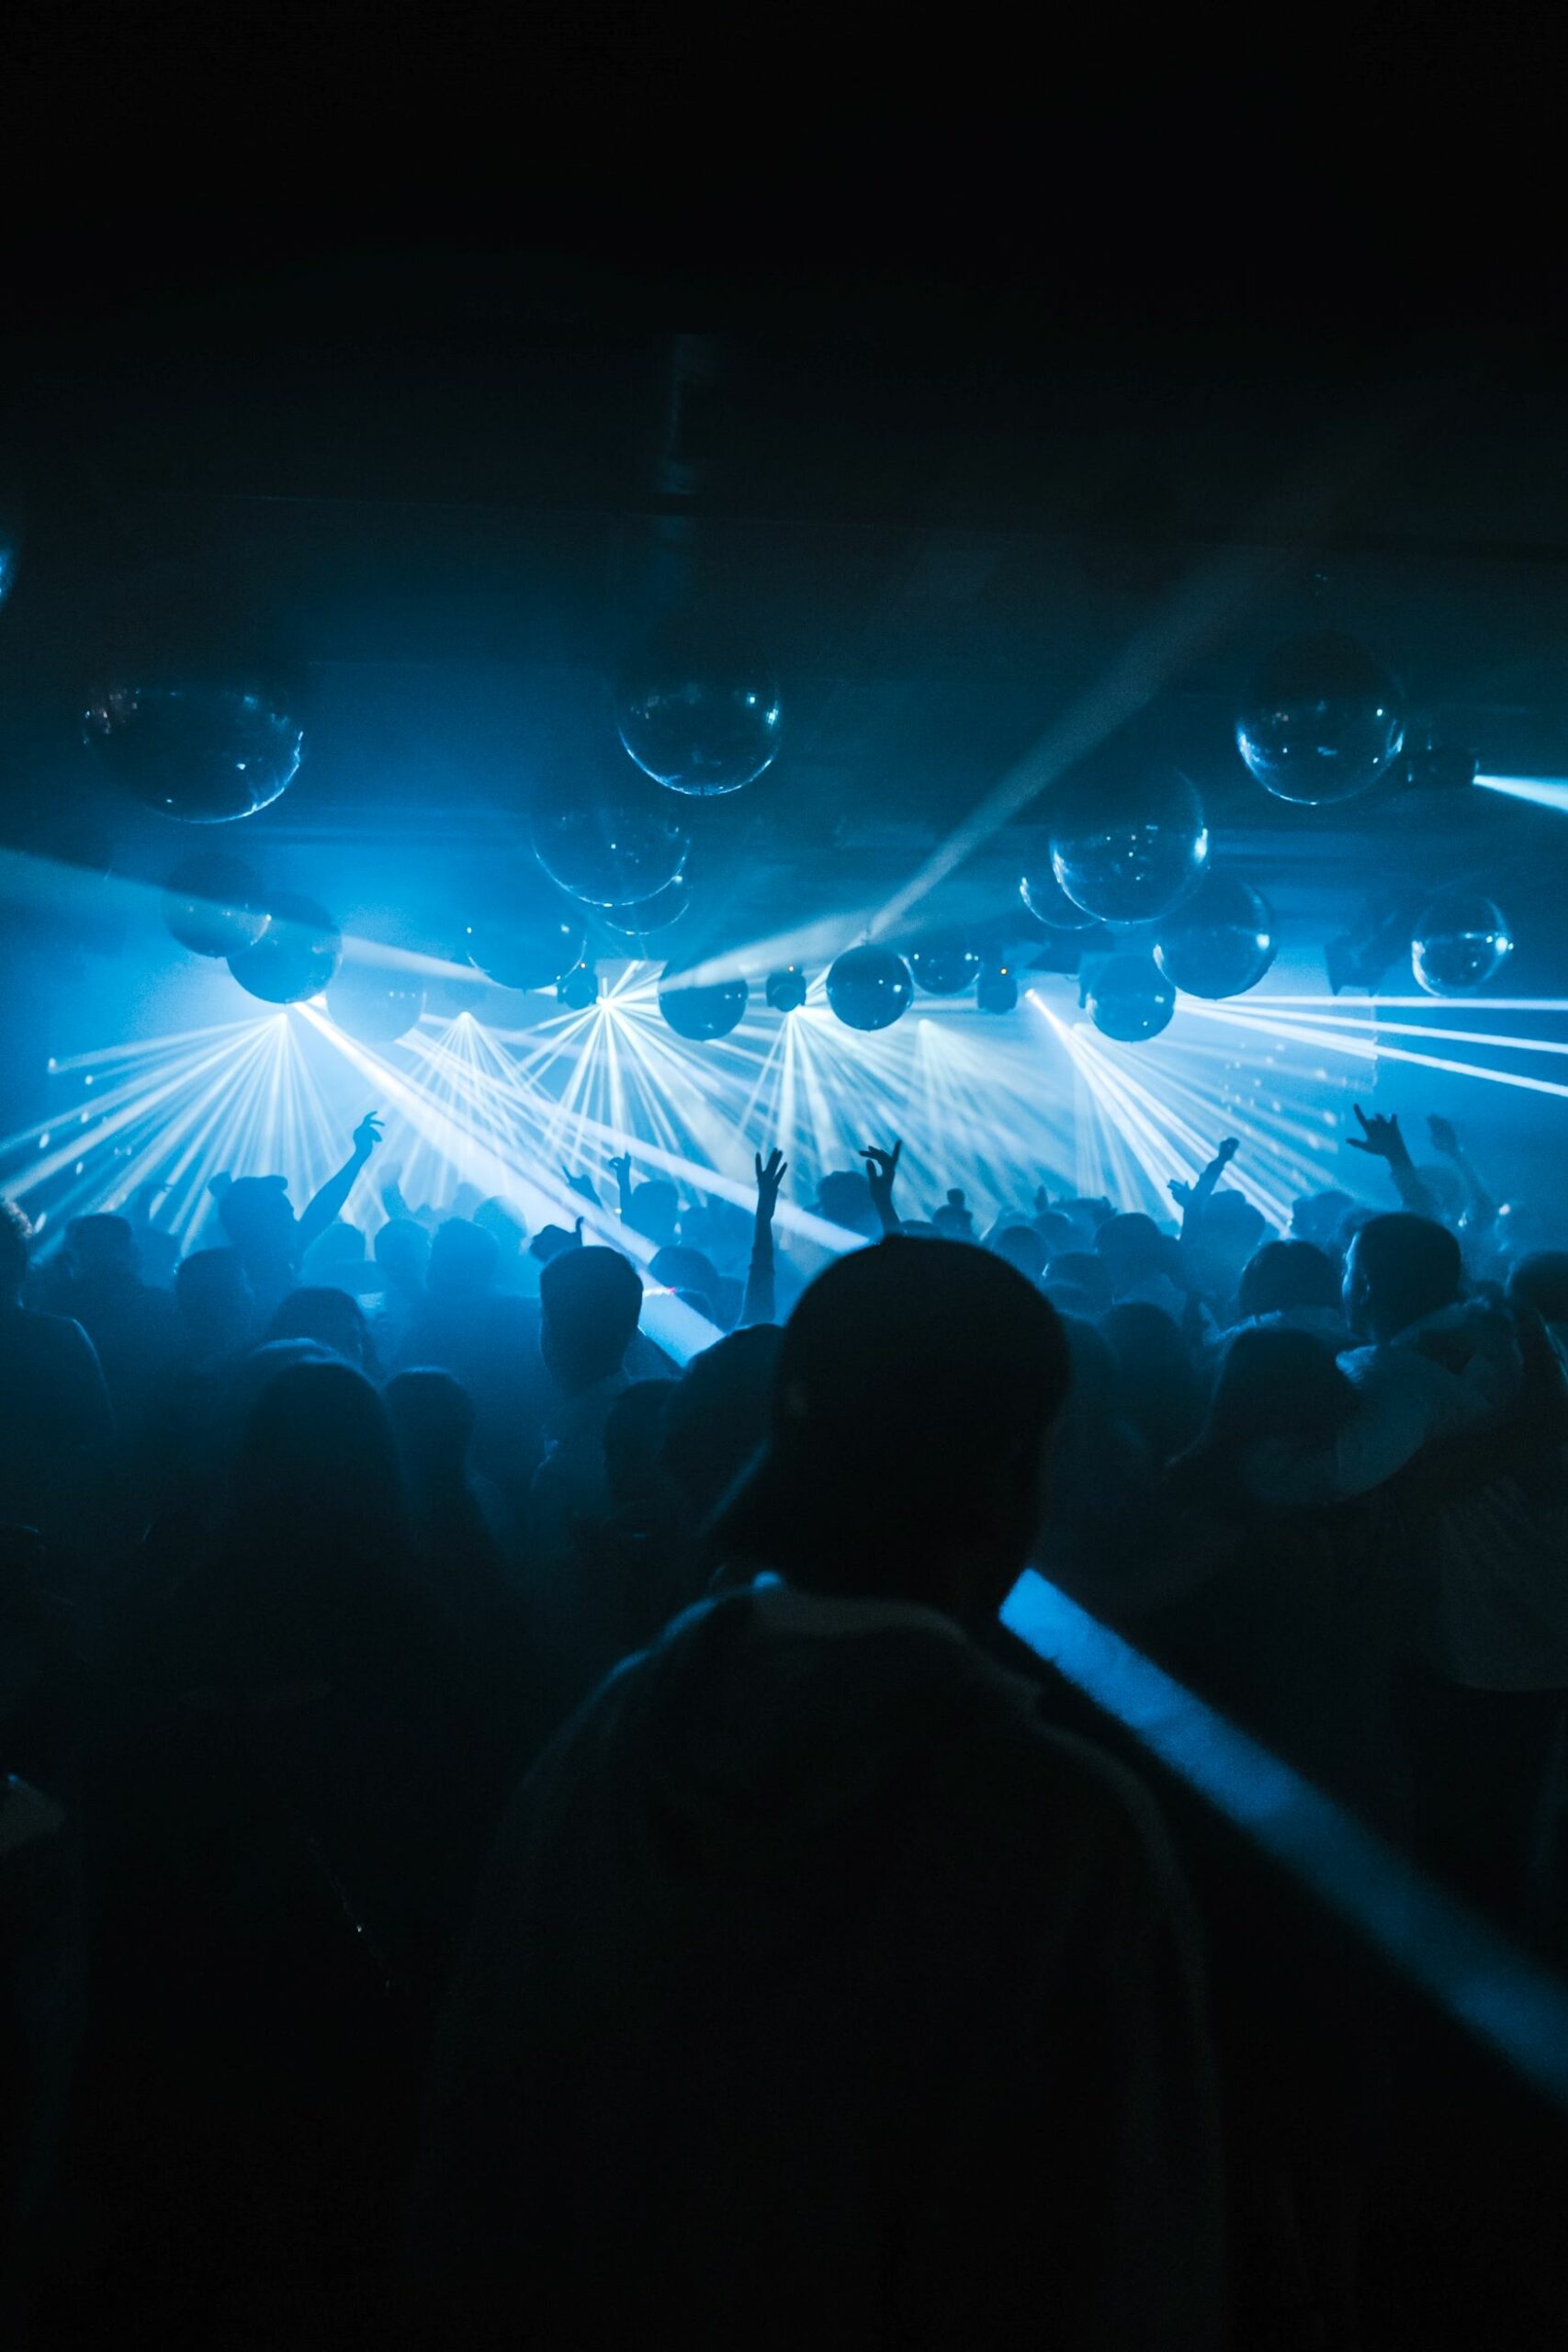 An image of people dancing at a nightclub.